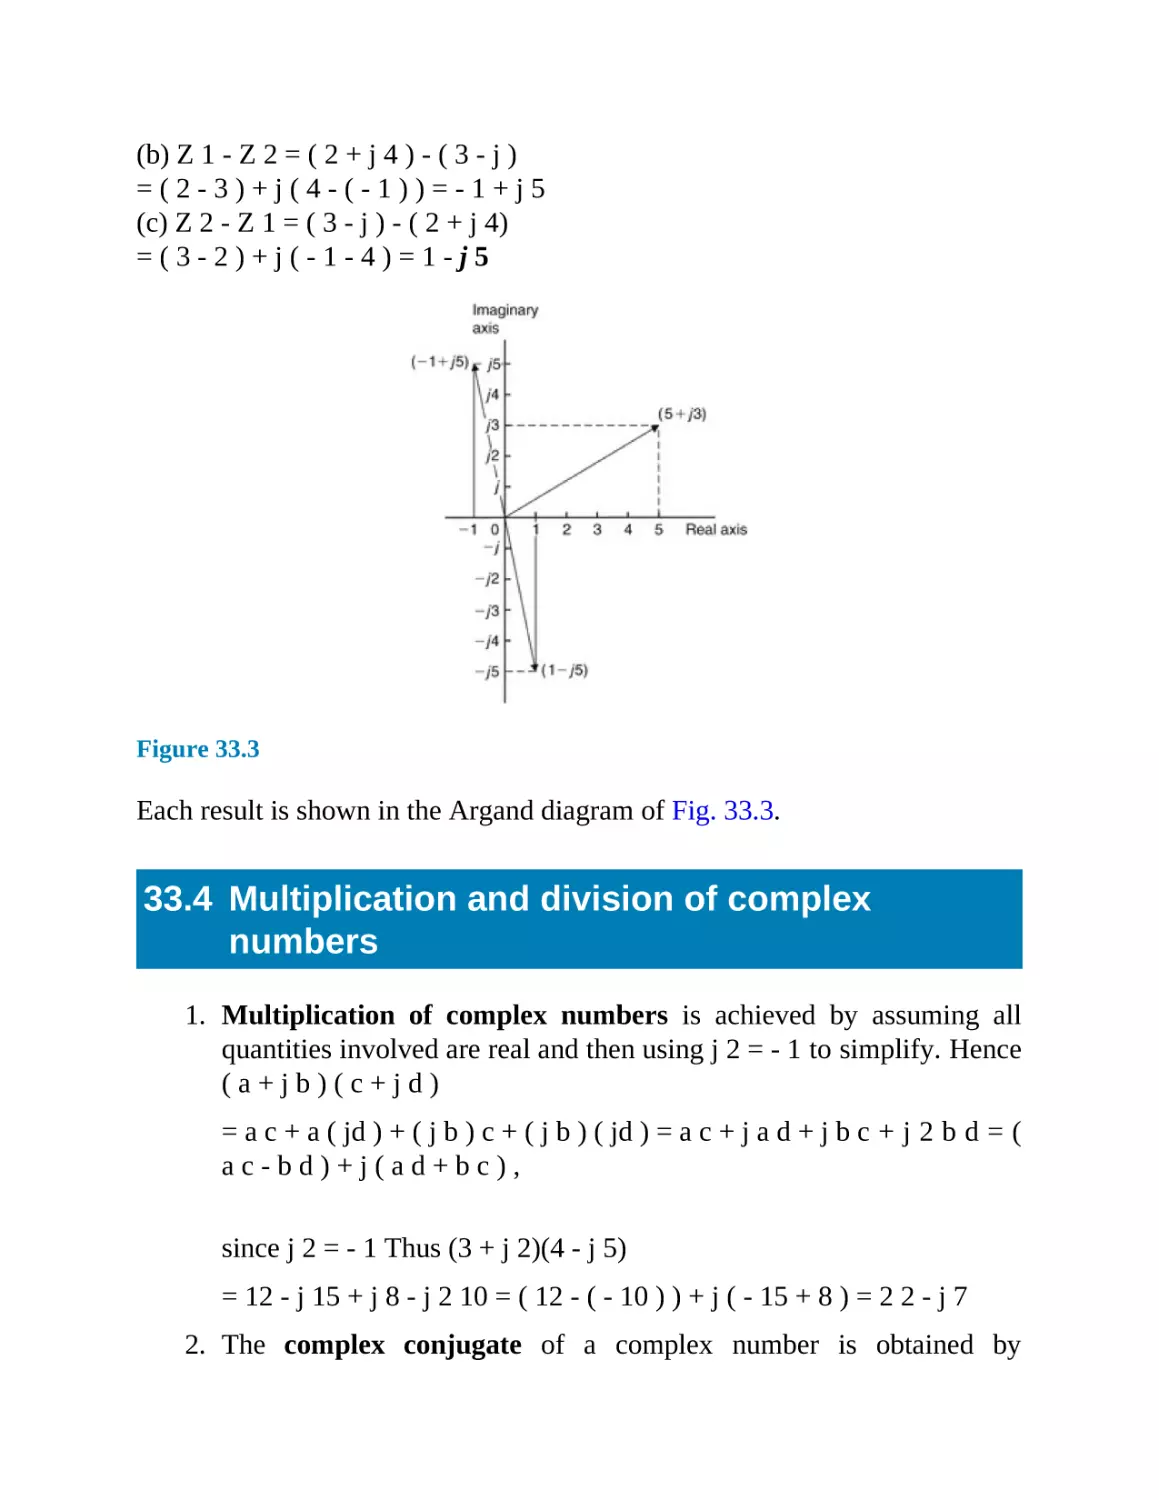 33.4 Multiplication and division of complex numbers